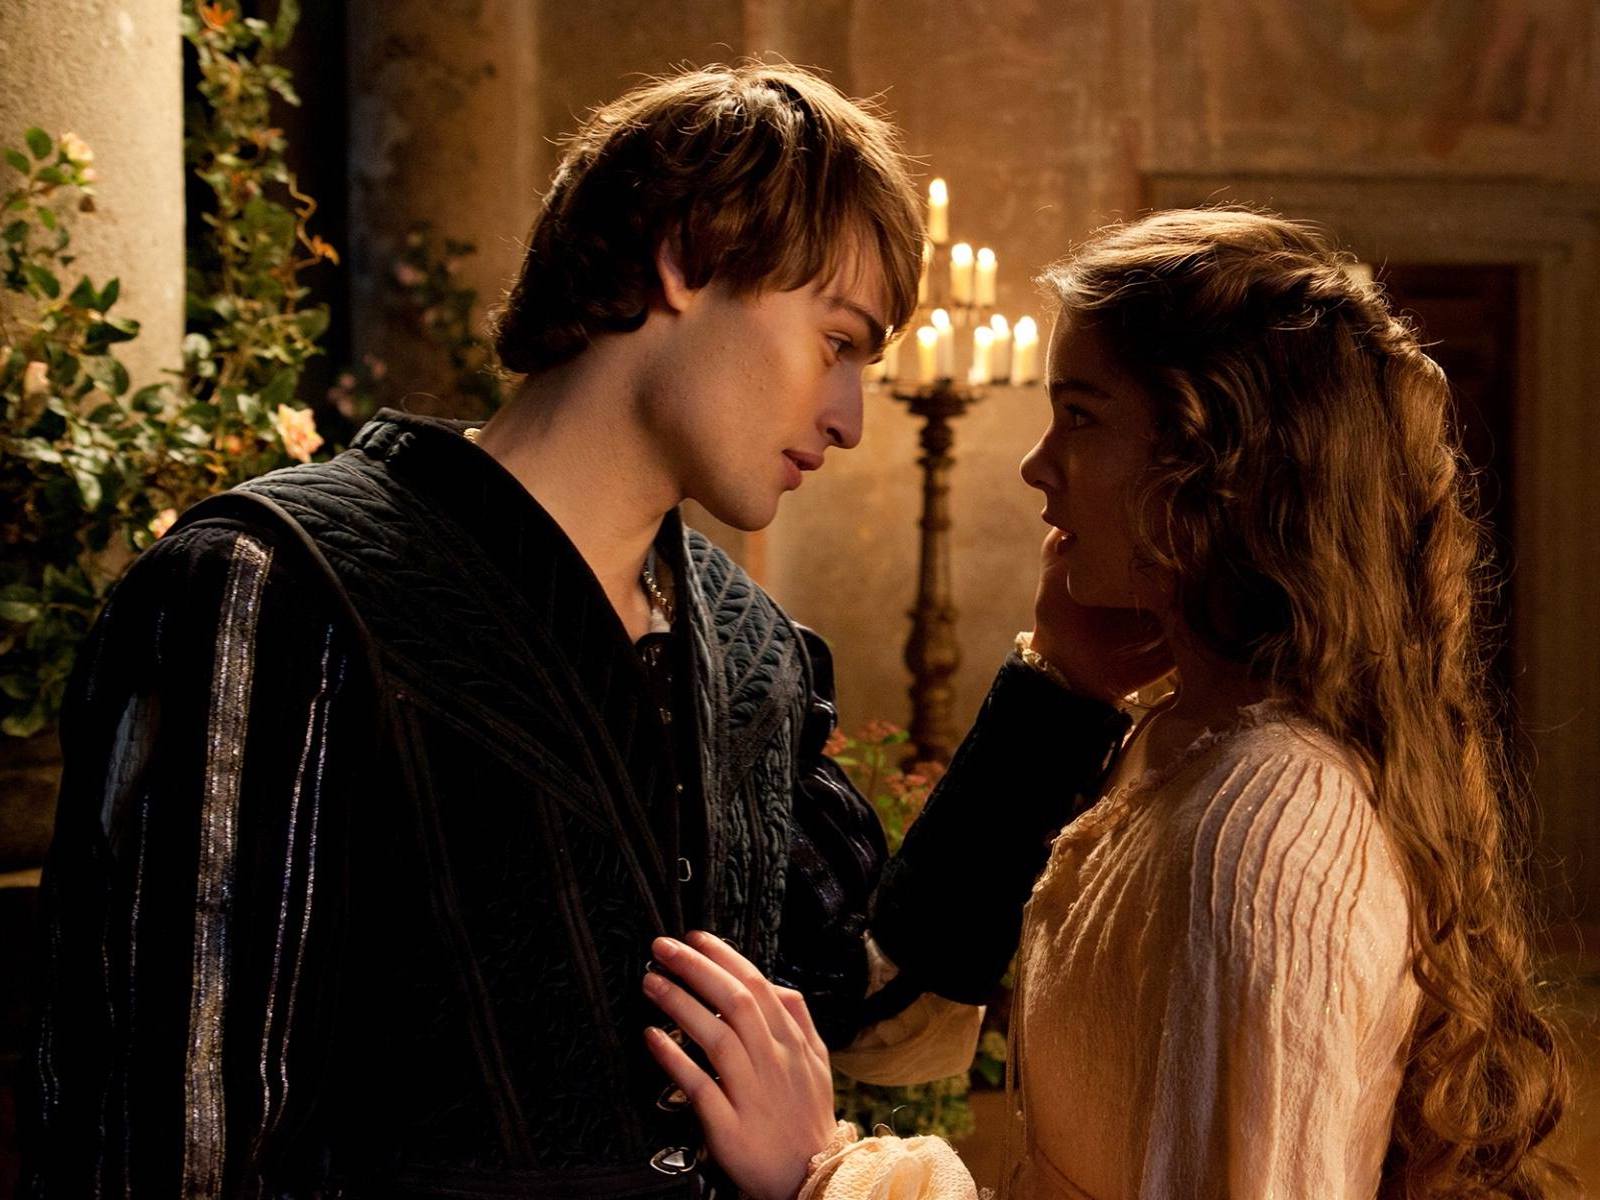 What’s Your IQ, Based Only on Your Opinions About Movies? Romeo and Juliet